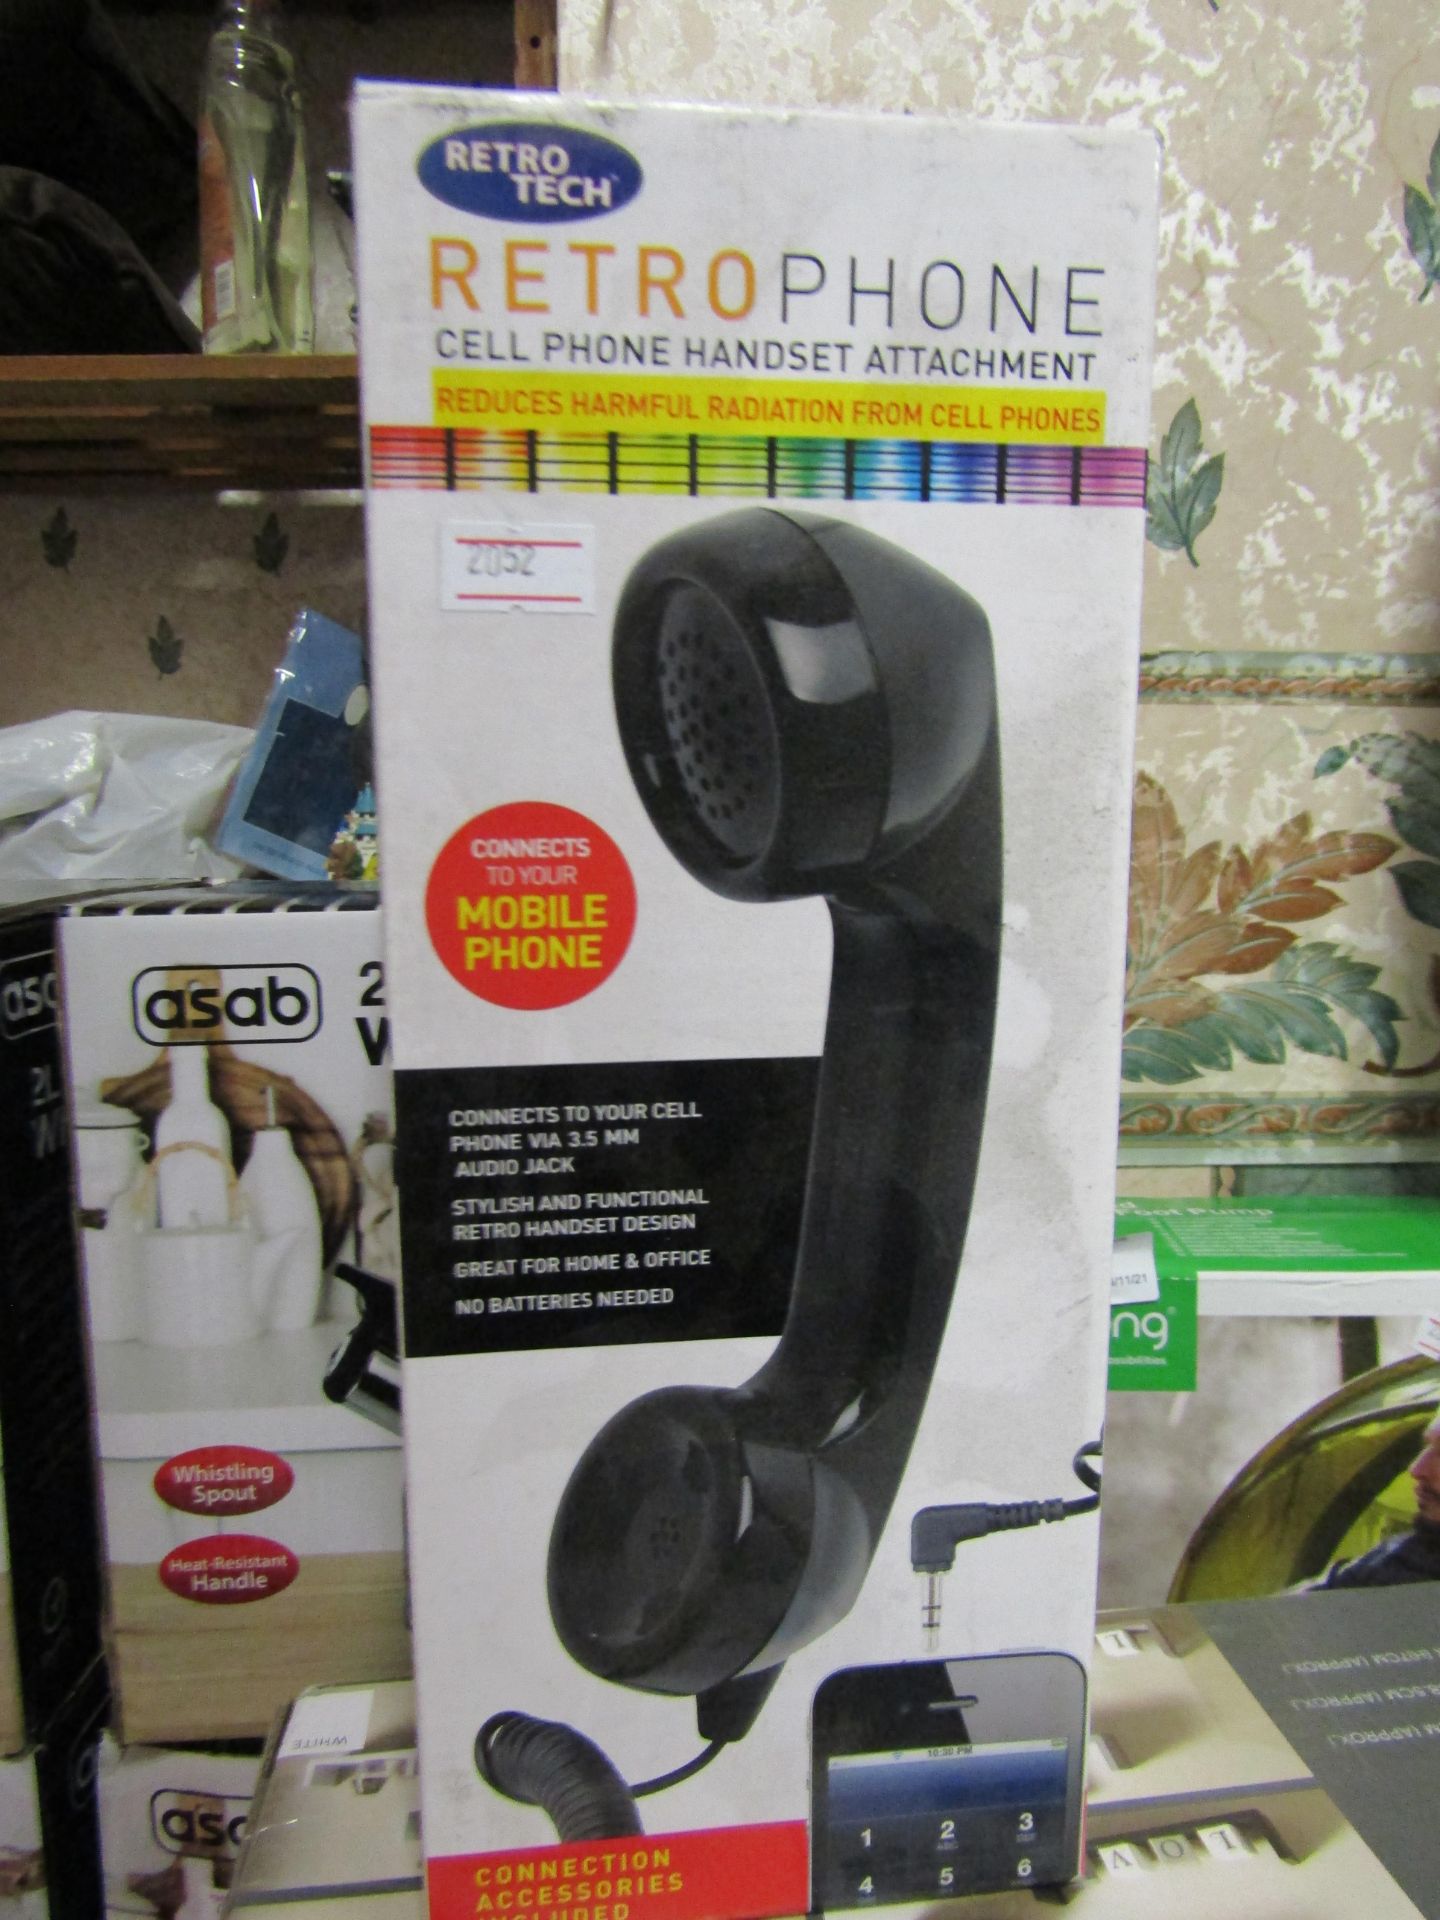 3 x RetroPhone Handset Attachments packaged unchecked